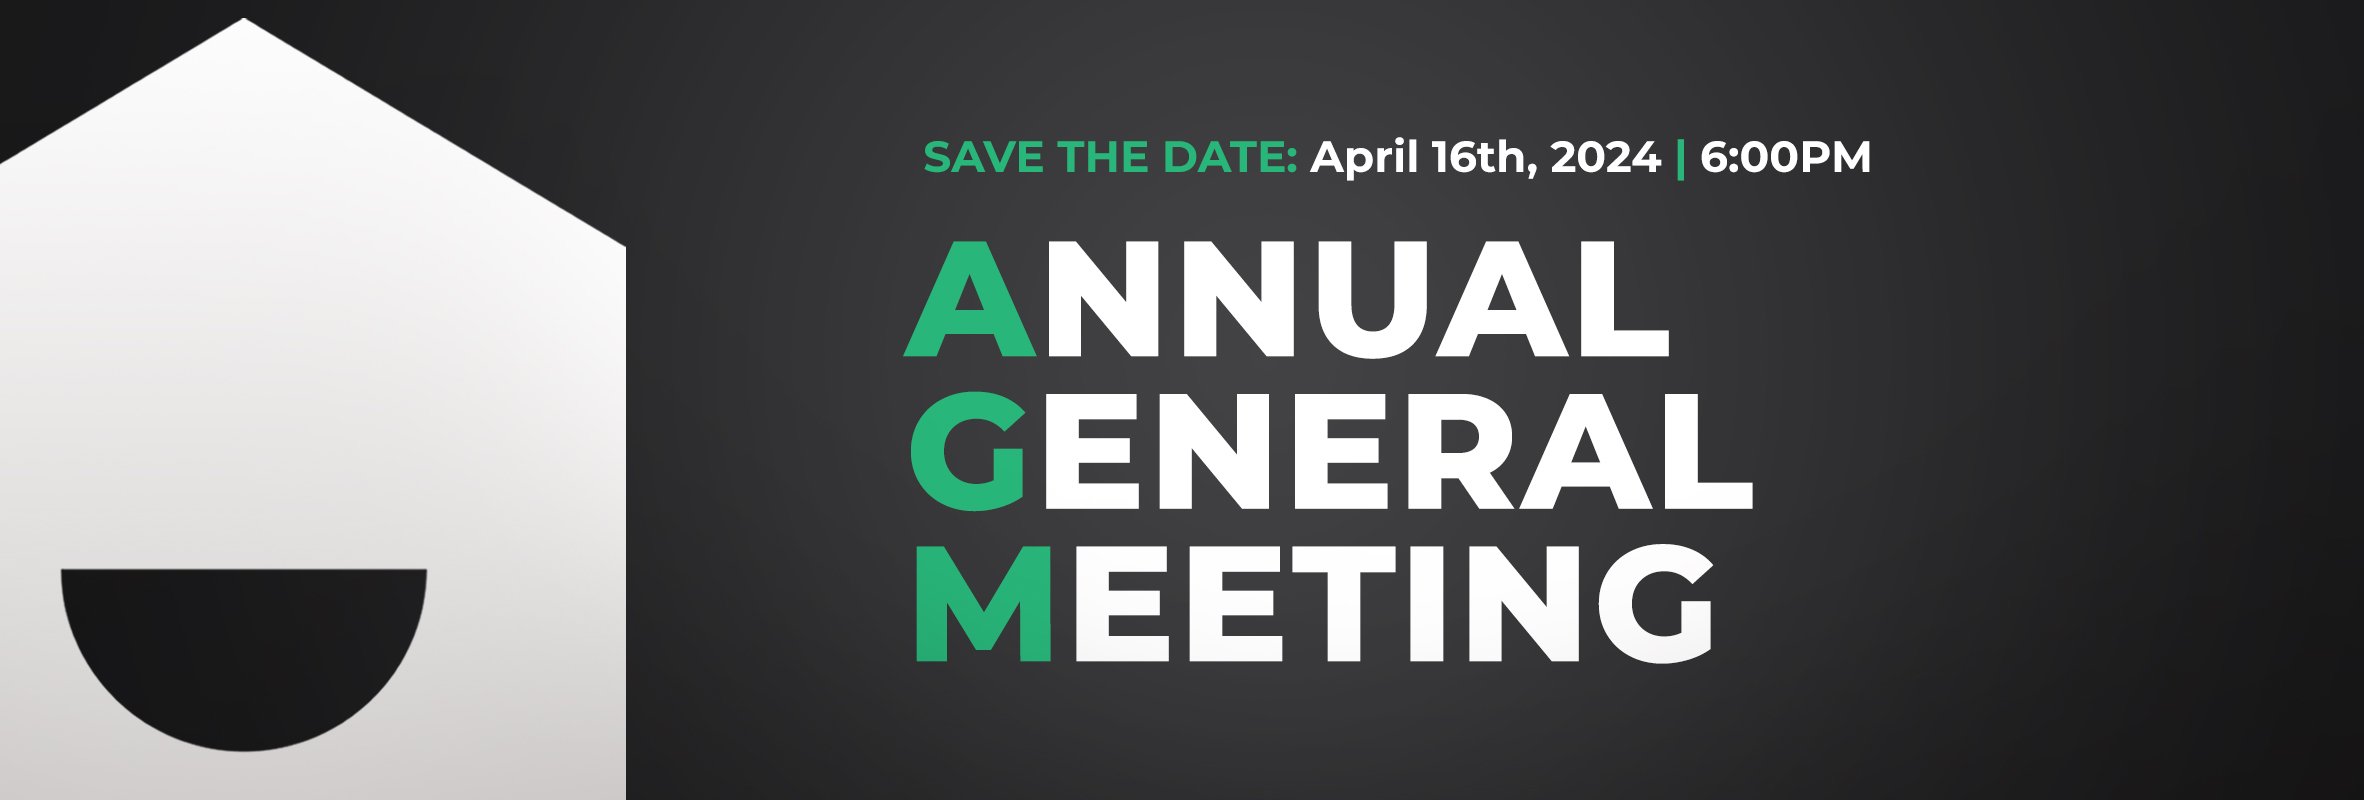 a white YNCU icon displayed on a dark background with the words Annual General Meeting and meeting information listed